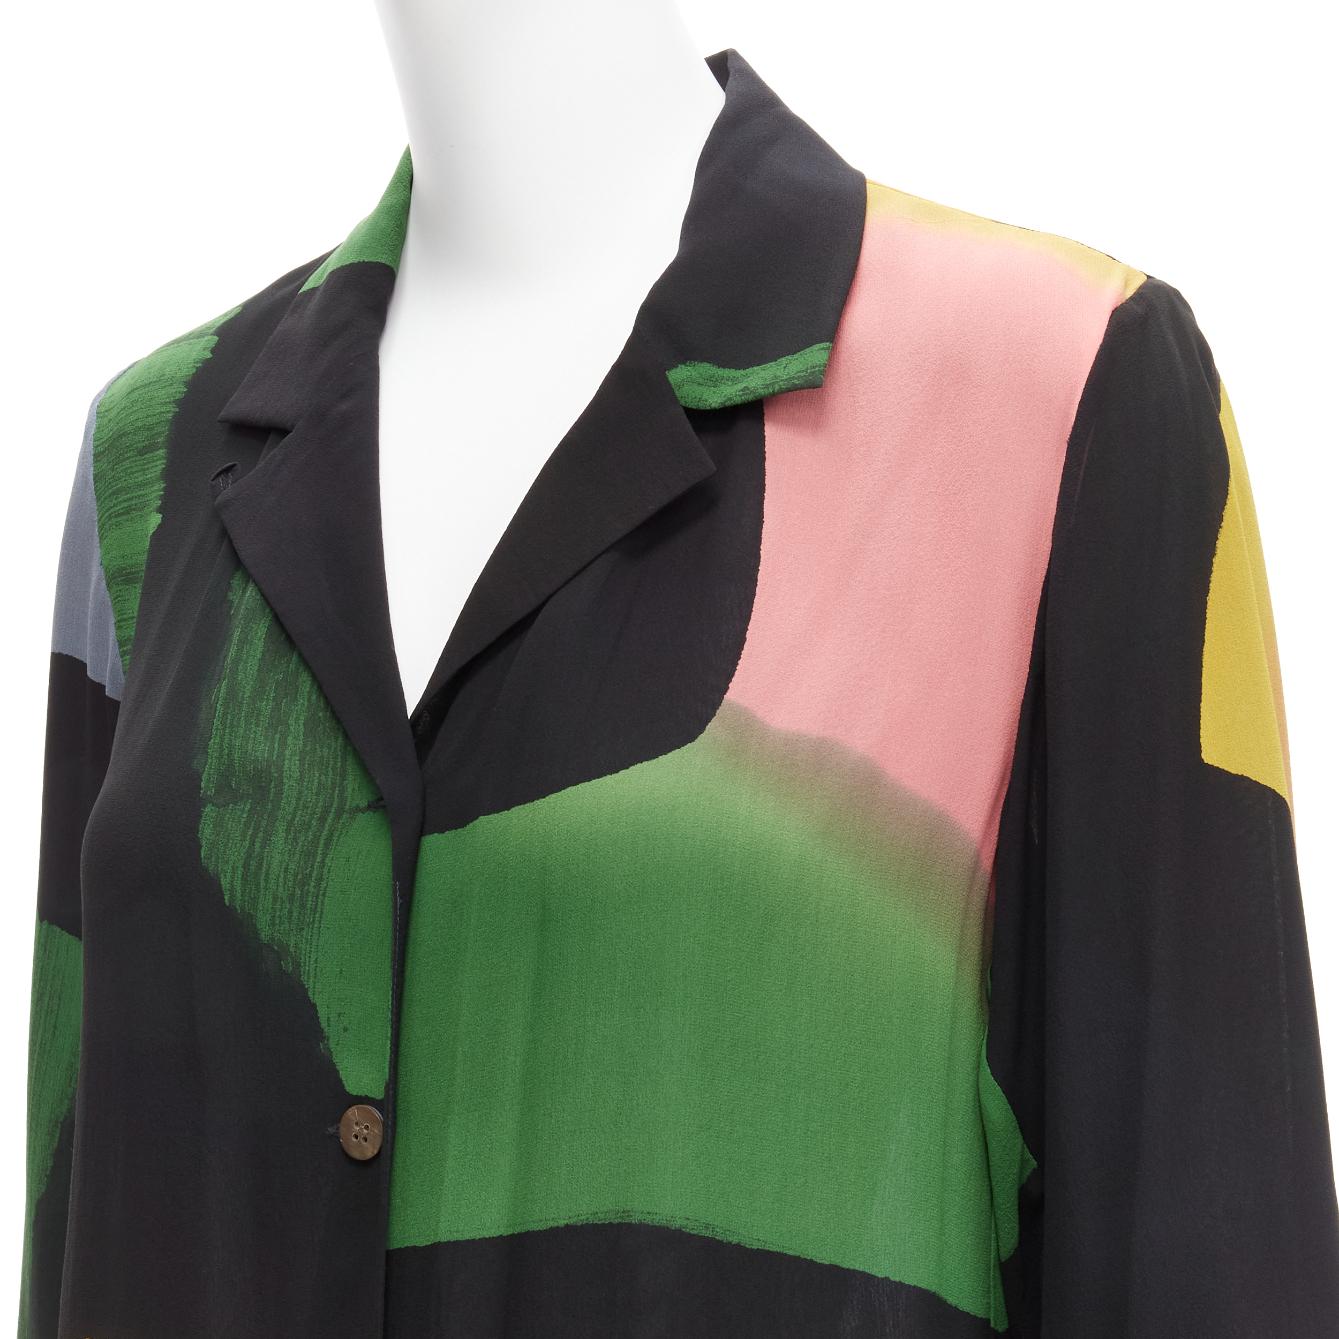 ISSEY MIYAKE Vintage 100% silk colorblocked brush stroke print long overshirt jacket M
Reference: TGAS/D00307
Brand: Issey Miyake
Material: Silk
Color: Multicolour, Black
Pattern: Abstract
Closure: Button
Extra Details: Longline cutting makes the